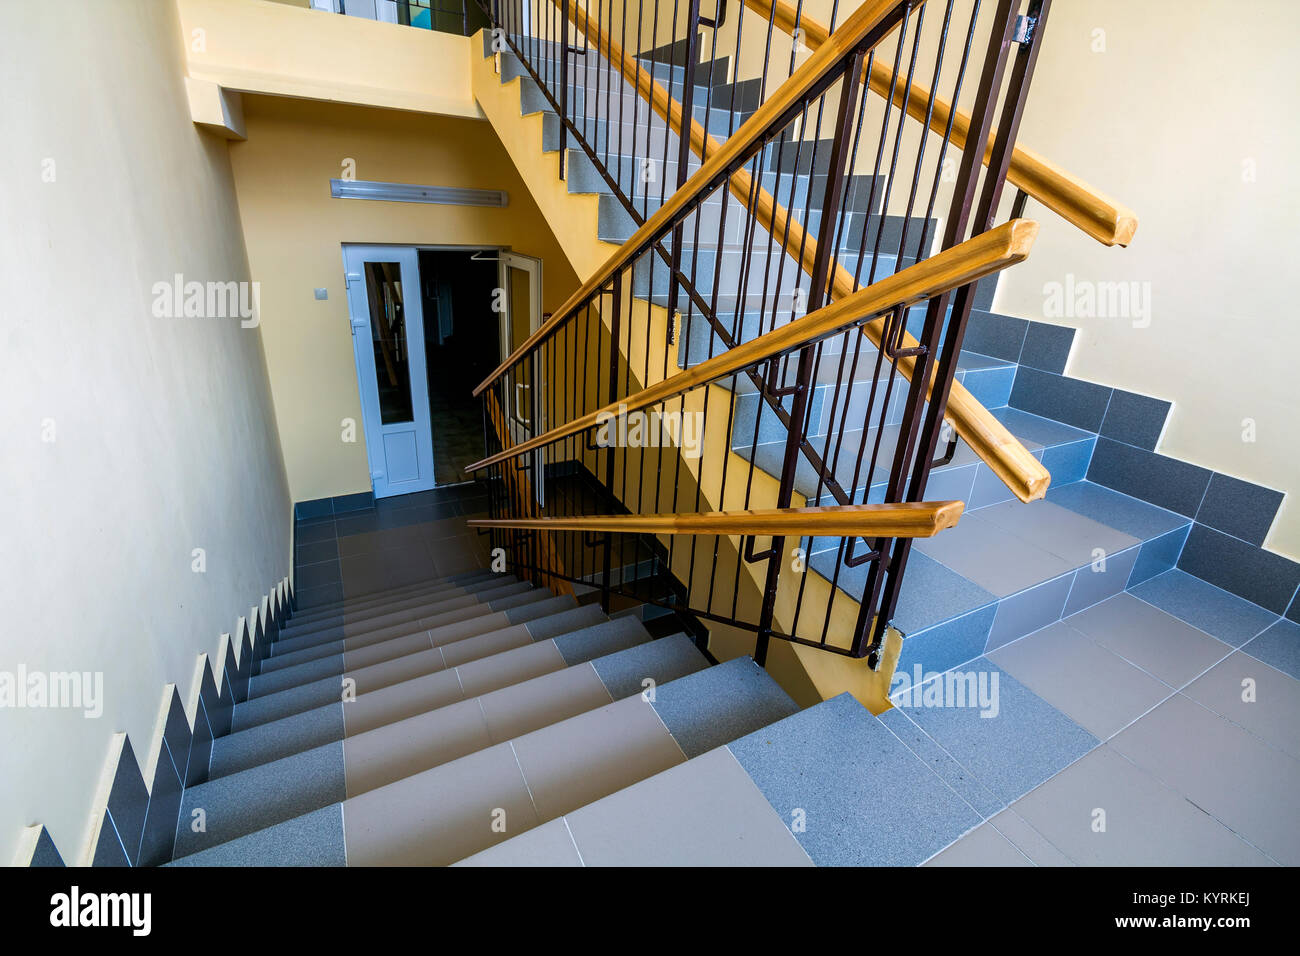 Staircase In Residential Building Interior With Stairs